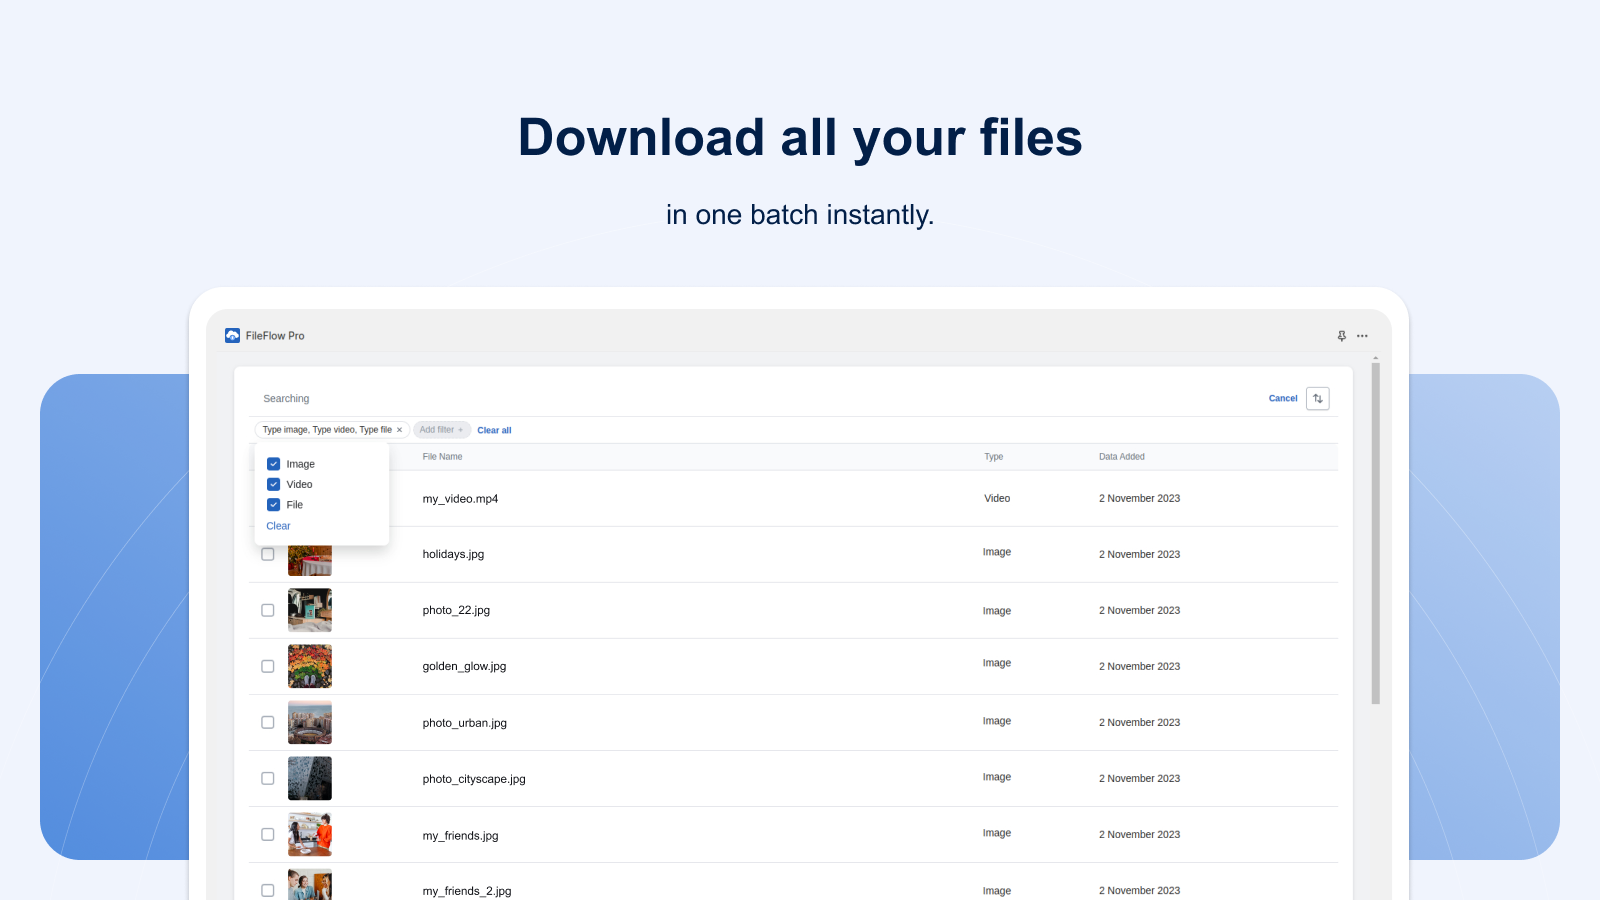 Download files in one batch